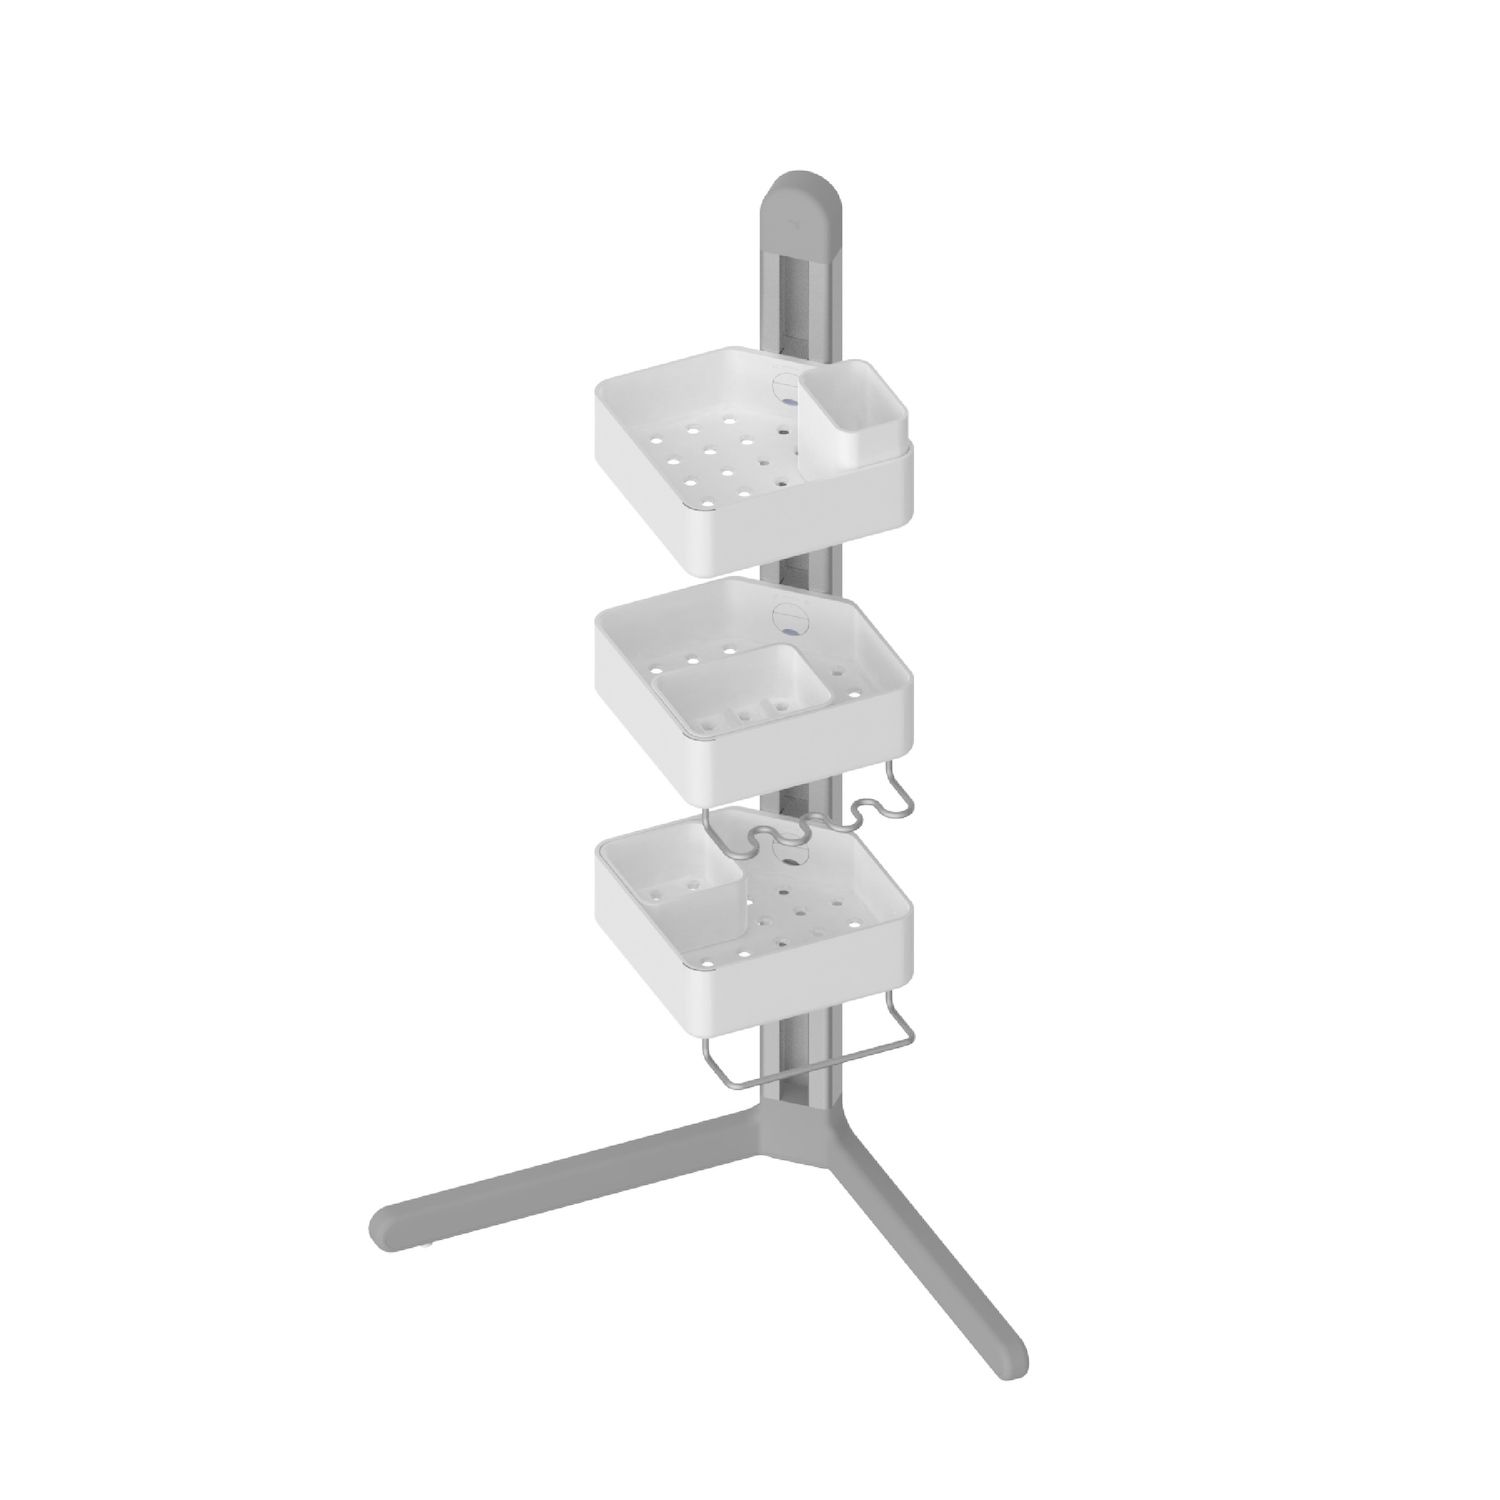 Bamodi 7 x 7 Shelf Stainless Steel Hanging Shower Caddy with Hooks -  2-Tier - Silver